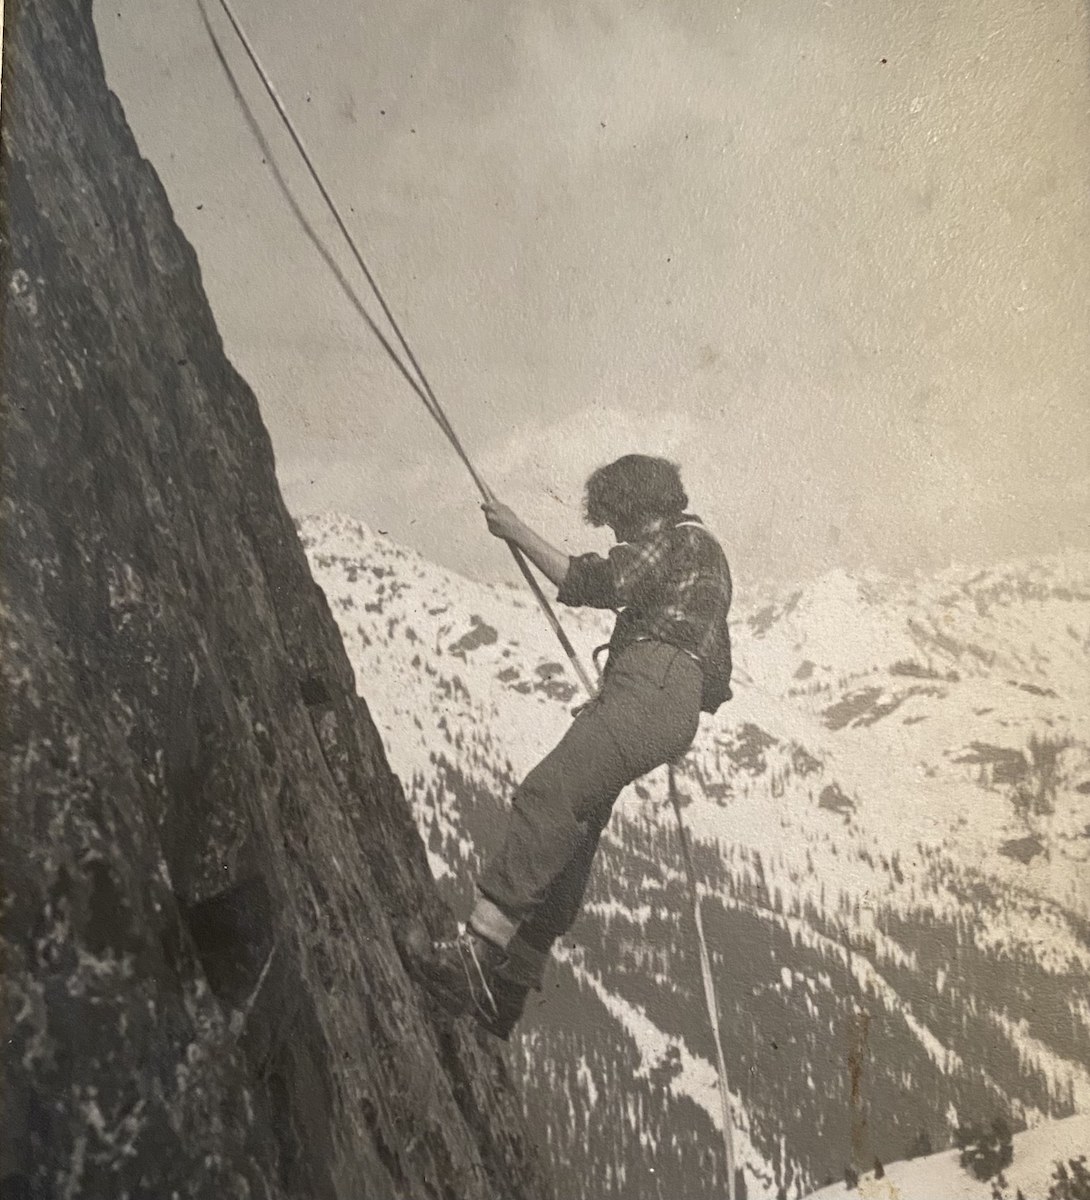 Betty Manning, descending the Tooth, ca. 1950s. [Photo] Courtesy of Claudia Manning